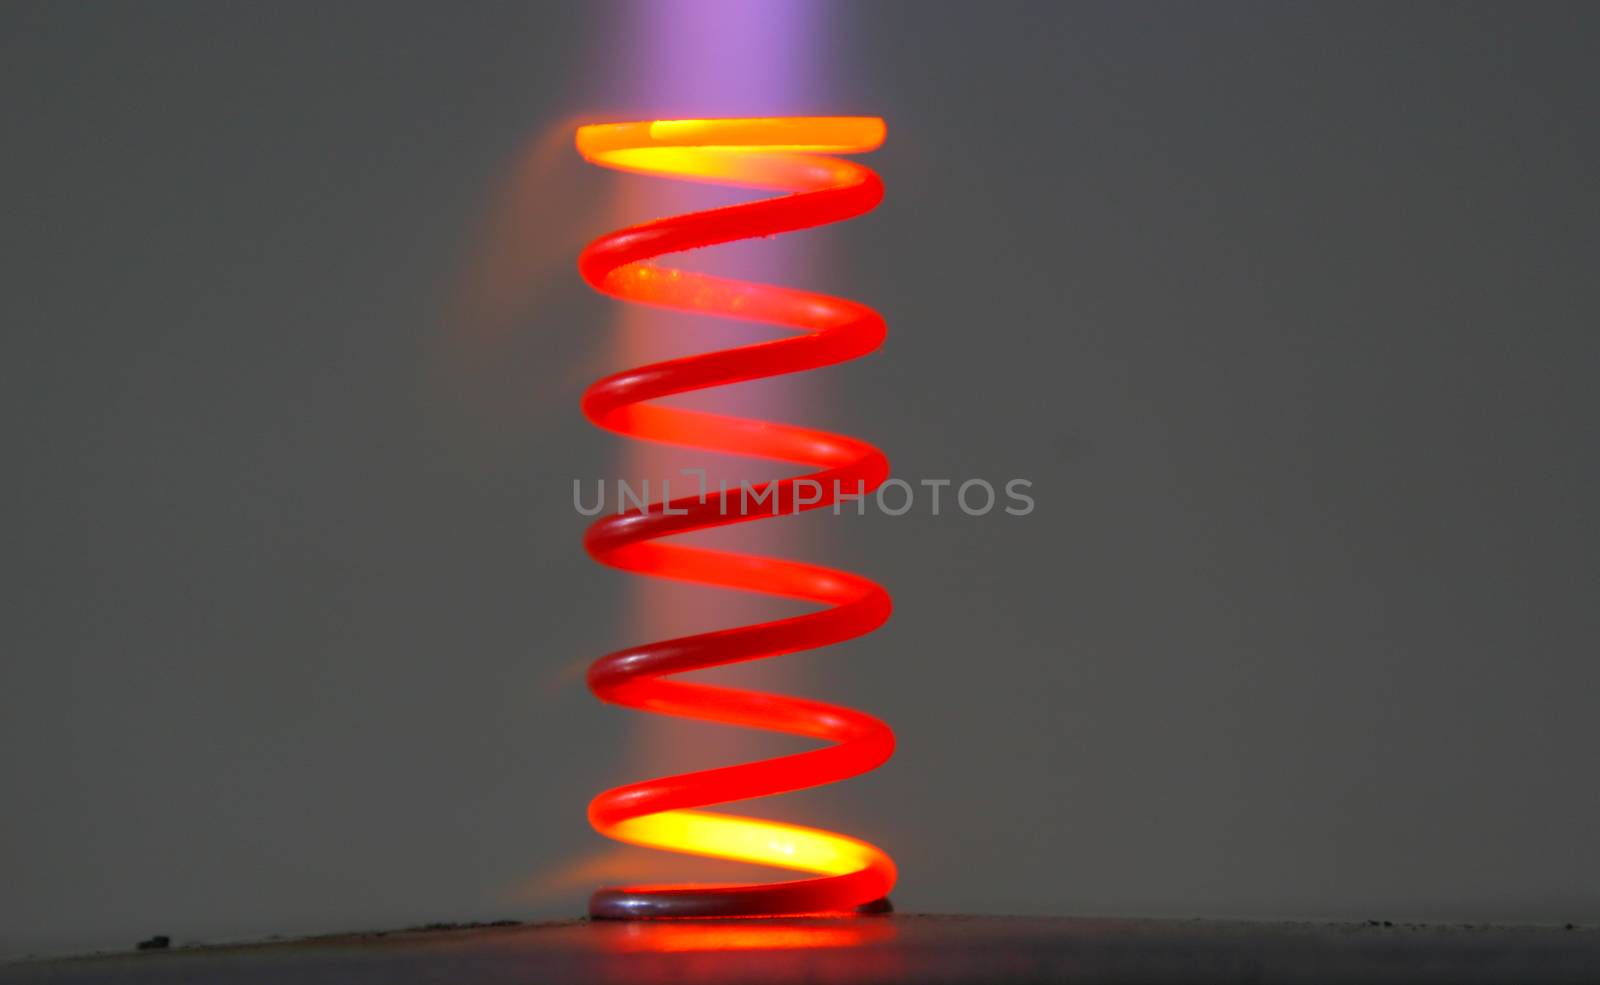 Technical closeup of a steele coil spring heated up to extreme temperatures so metal has changed it's color. Part of the gas flame still visible on the picture with smooth dark background.